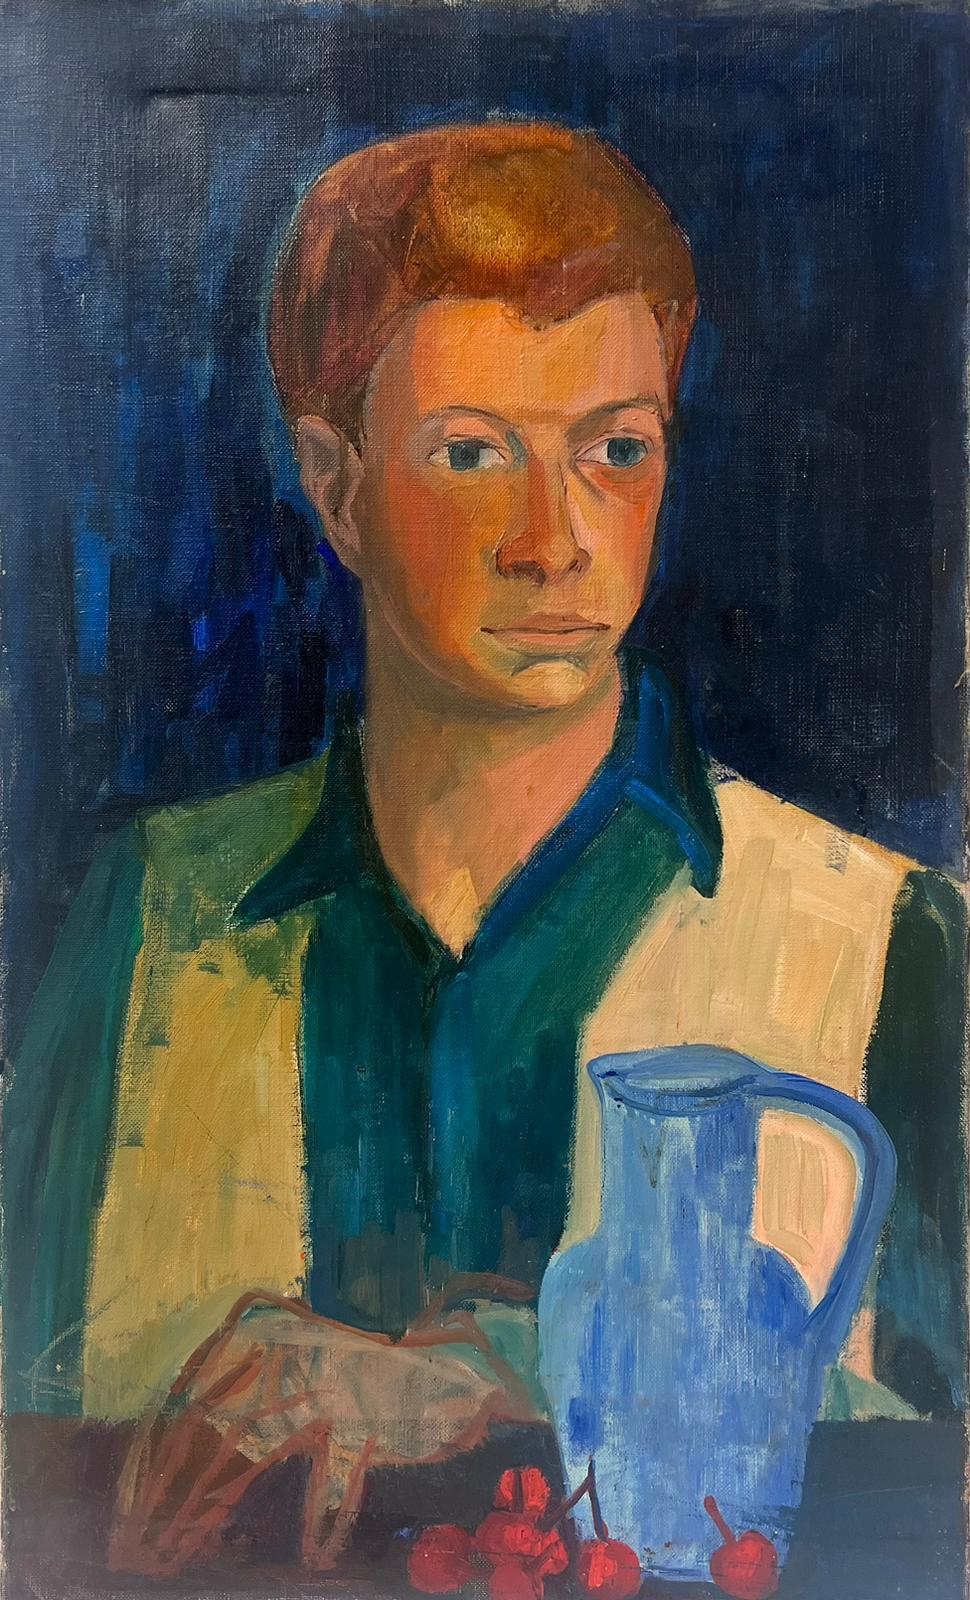 Mid 20th Century French School Figurative Painting - 1950's French Oil Portrait of Man with Cherries & Blue Jug Mid Century original